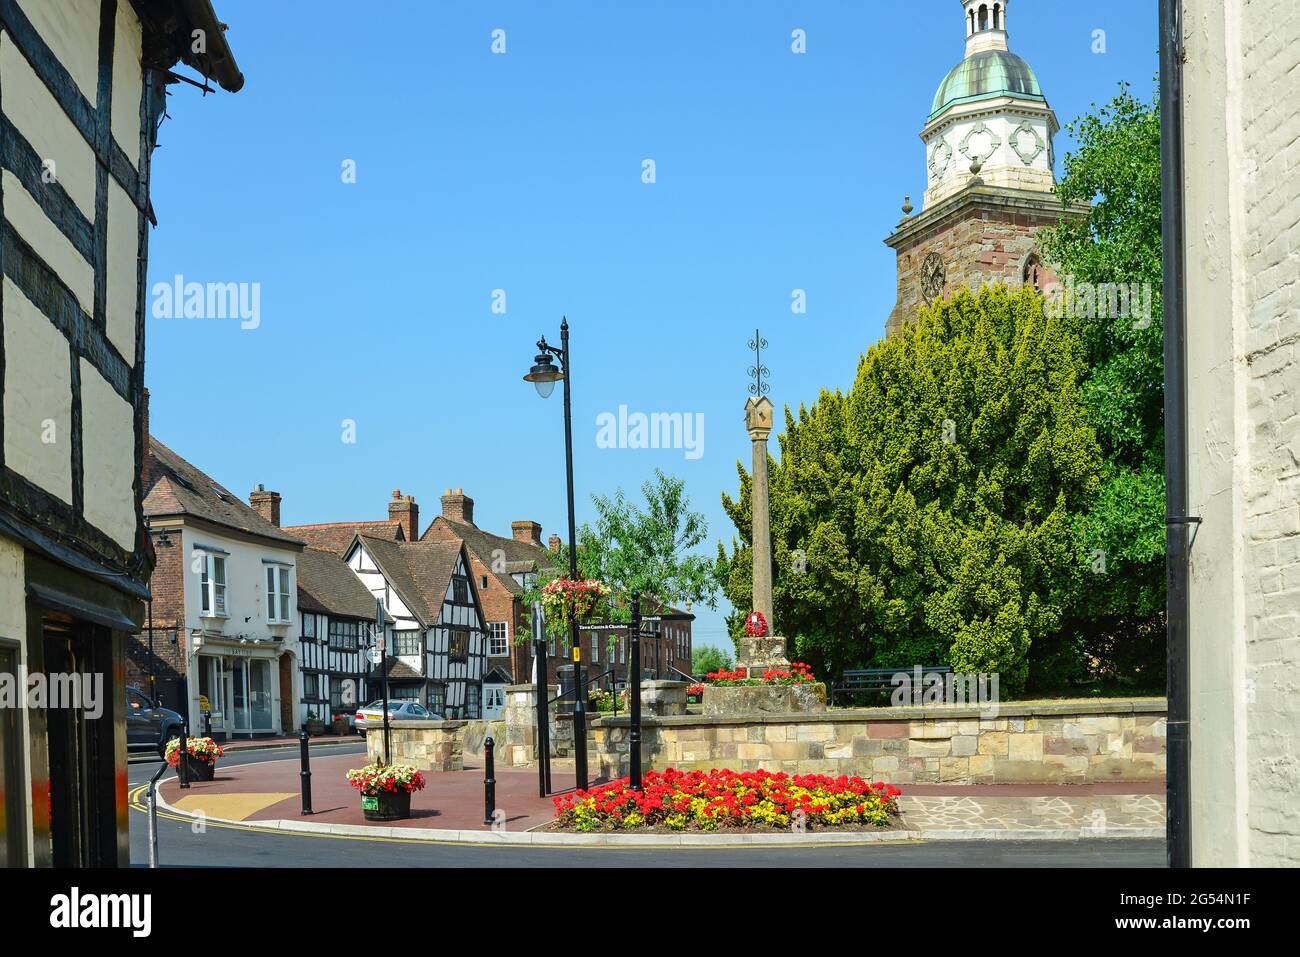 The 'Pepperpot' and period buildings High Street, Upton-upon-Severn, Worcestershire, England, United Kingdom Stock Photo